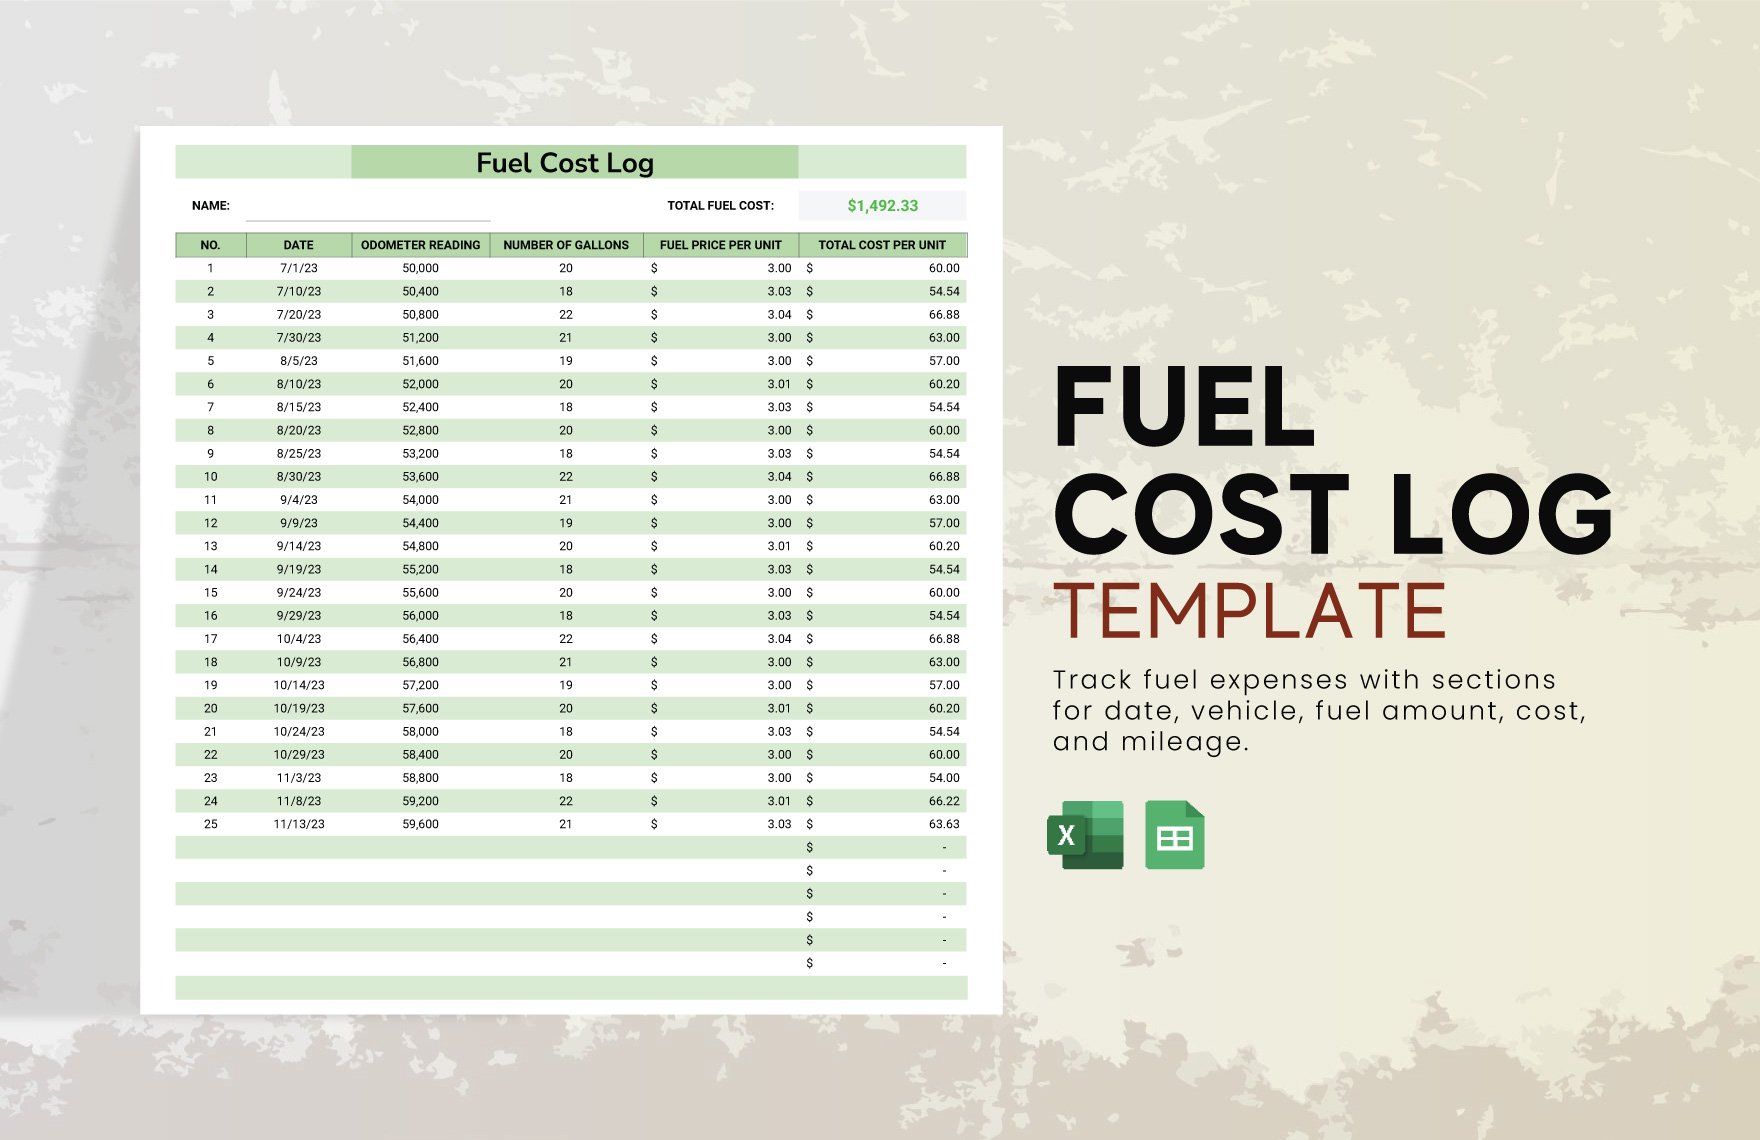 Fuel Cost Log Template in Excel, Google Sheets